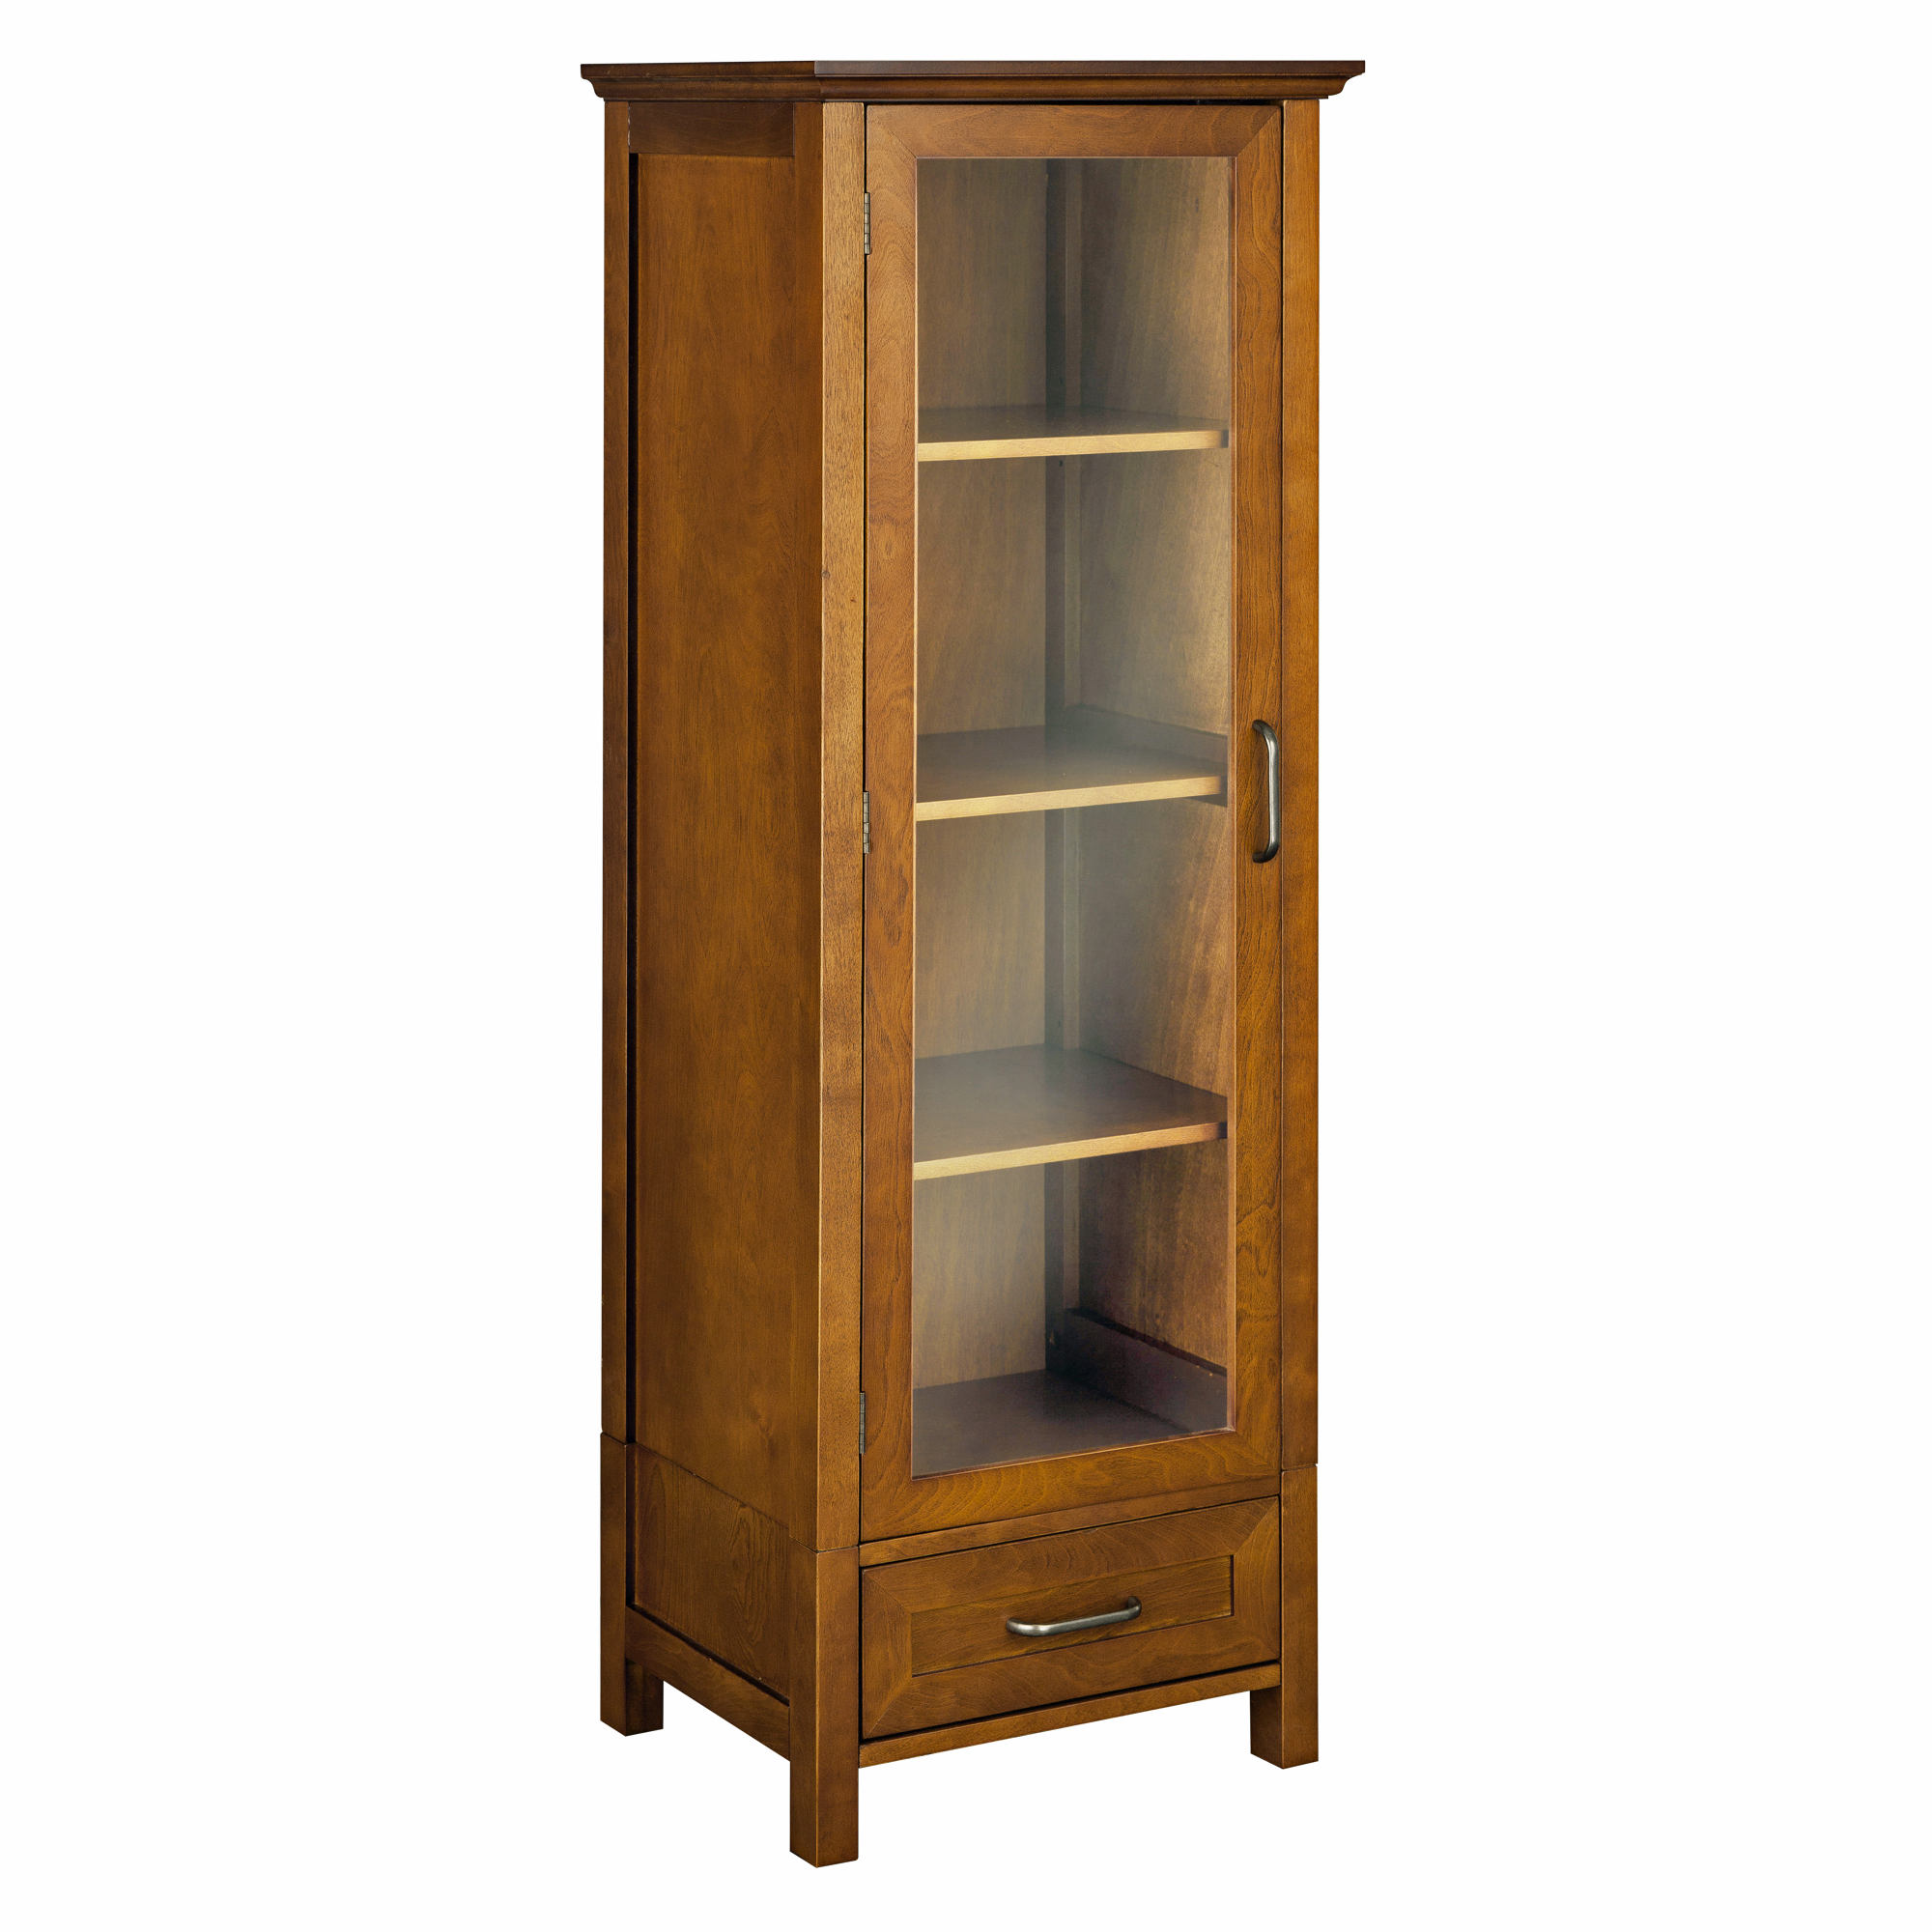 Elegant Home Fashions Calais Wood Linen Cabinet with Glass Door, Oil Oak - image 1 of 7